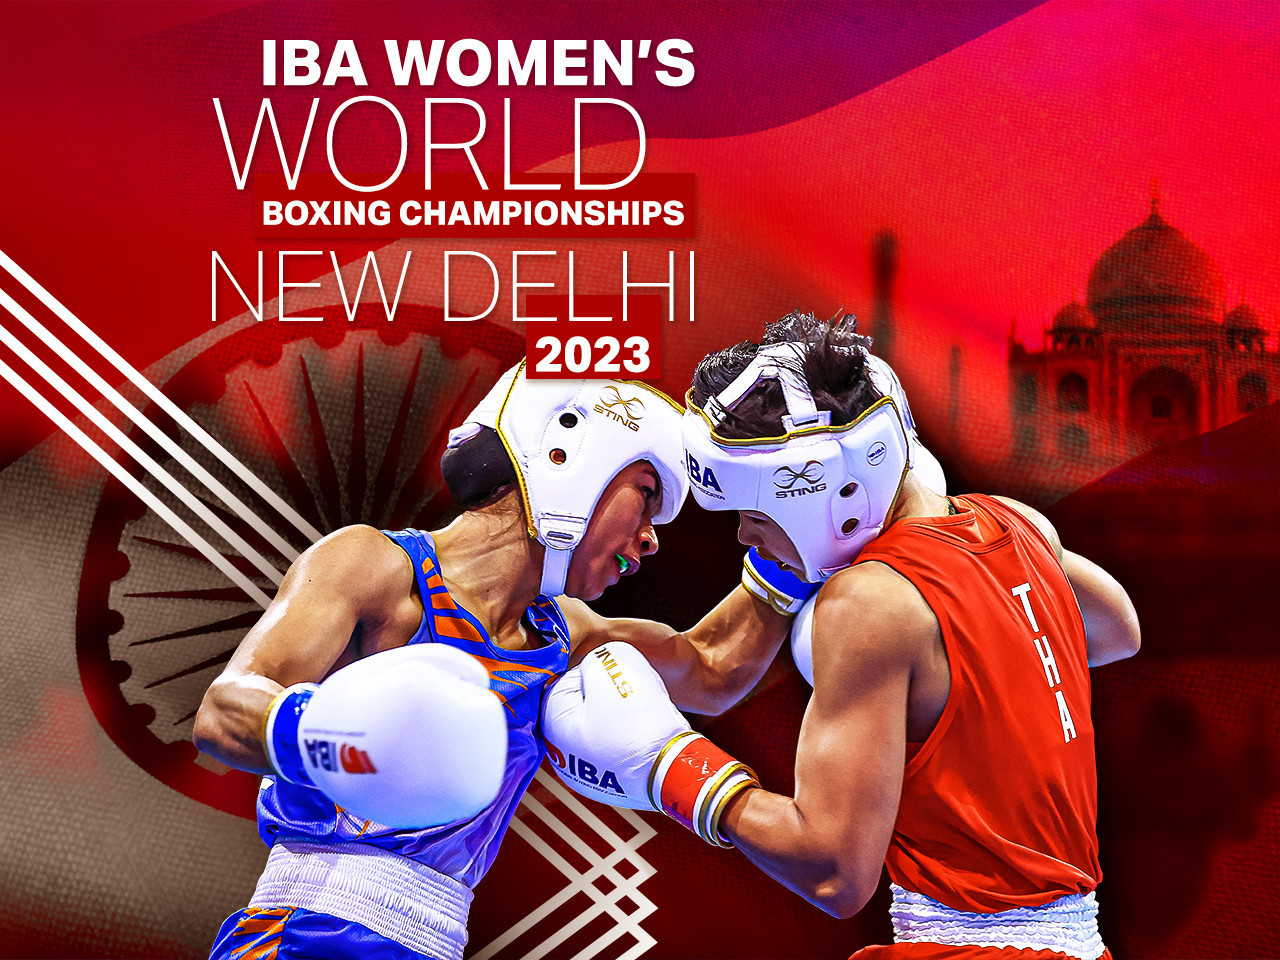 New Delhi is set to host the IBA Women's World Boxing Championships from March 15 to 26 ©IBA